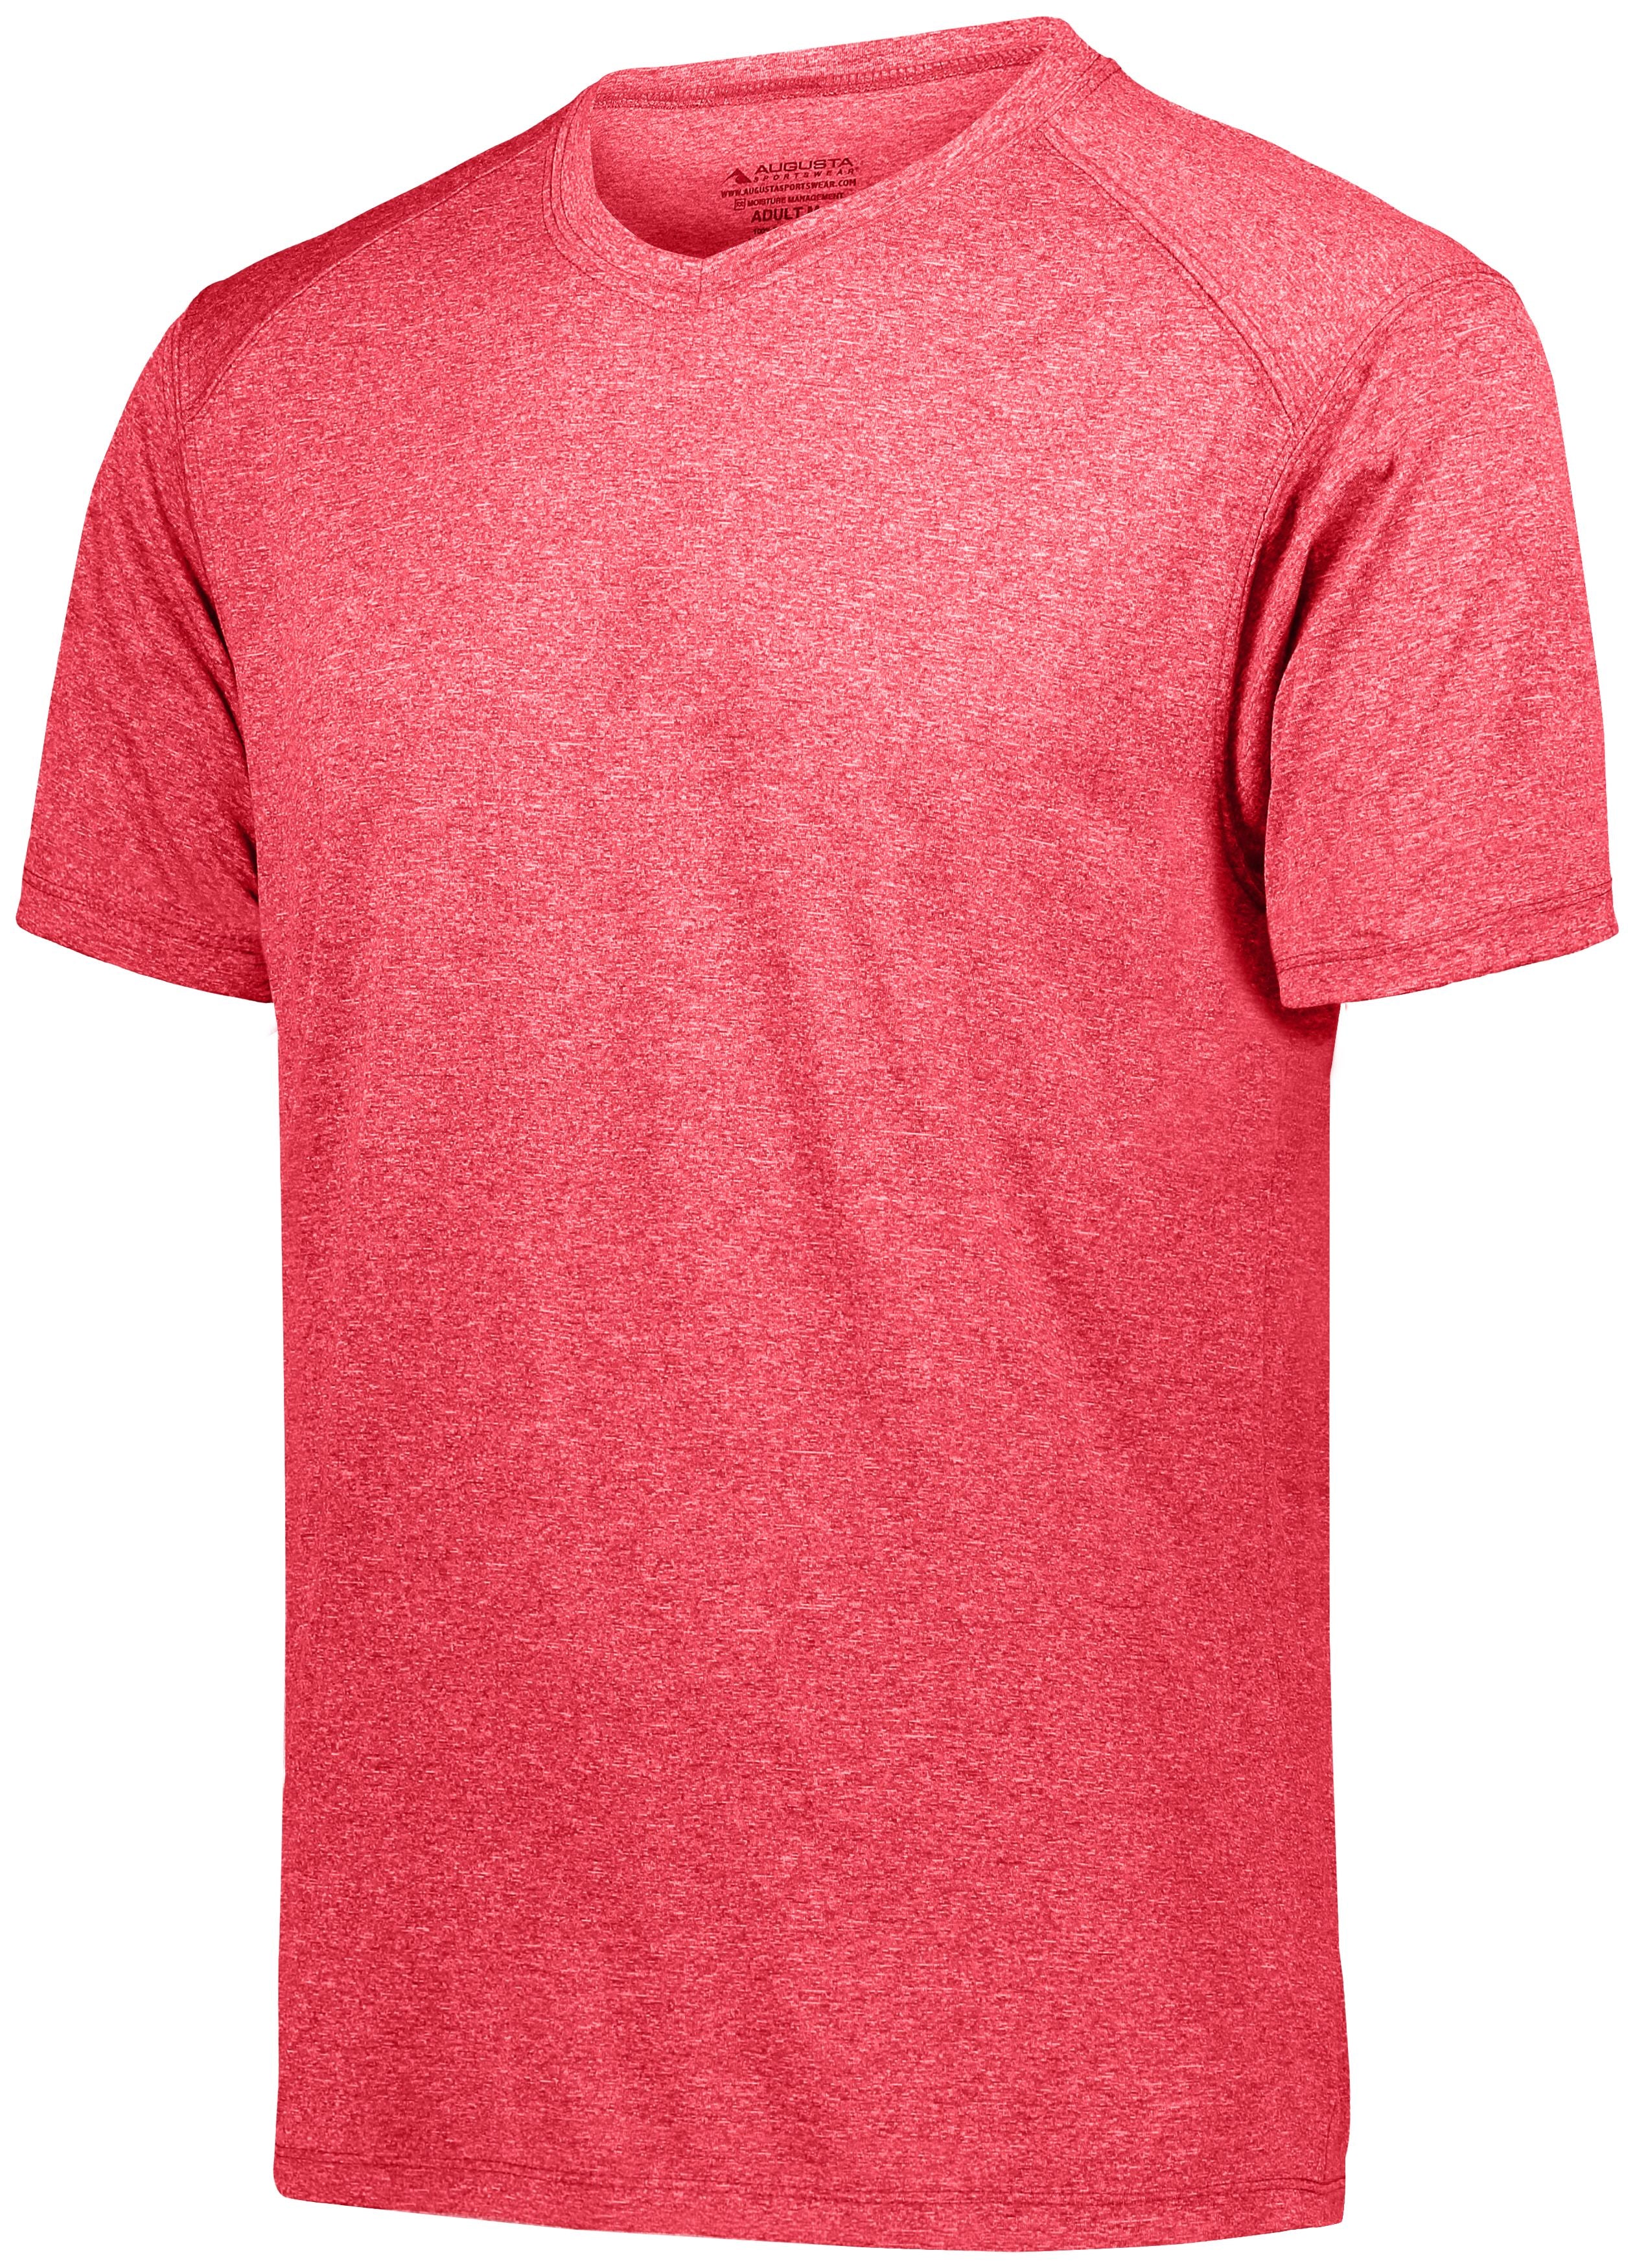 Augusta Sportswear Youth Kinergy Training Tee in Red Heather  -Part of the Youth, Youth-Tee-Shirt, T-Shirts, Augusta-Products, Shirts product lines at KanaleyCreations.com